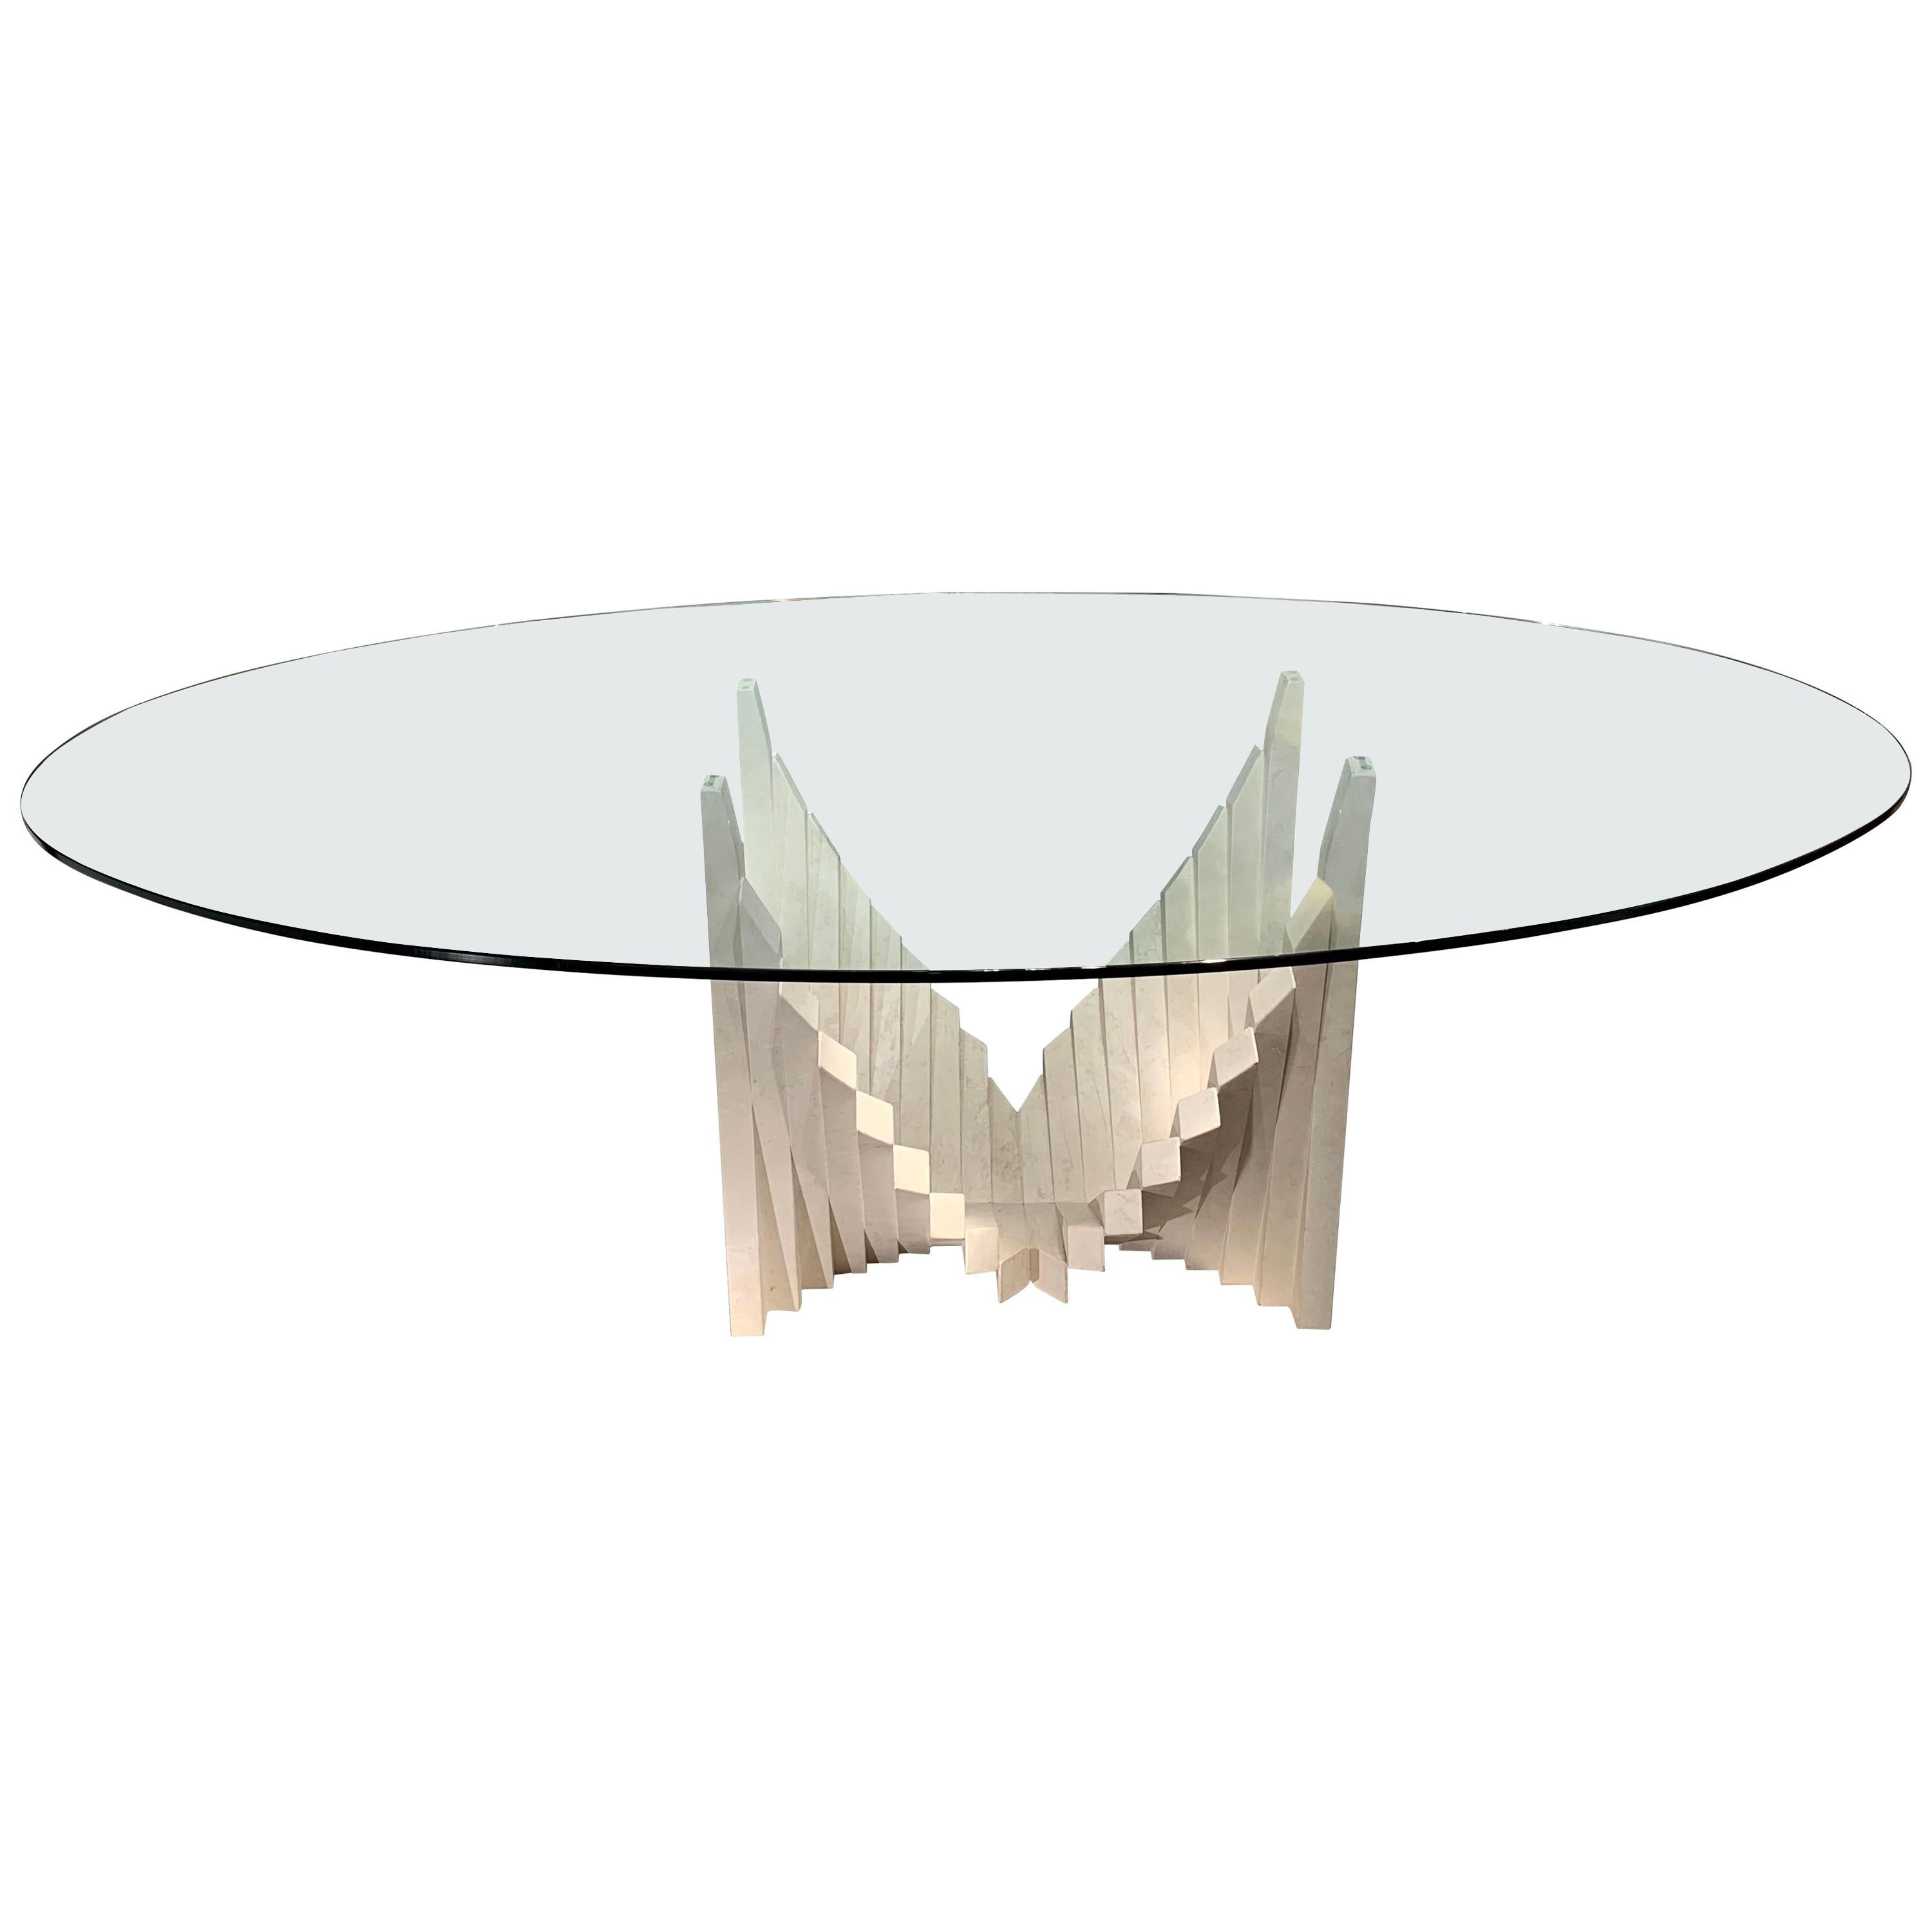 Travertine Accordian Shape Design Base Glass Top Dining Table, France, 1970s